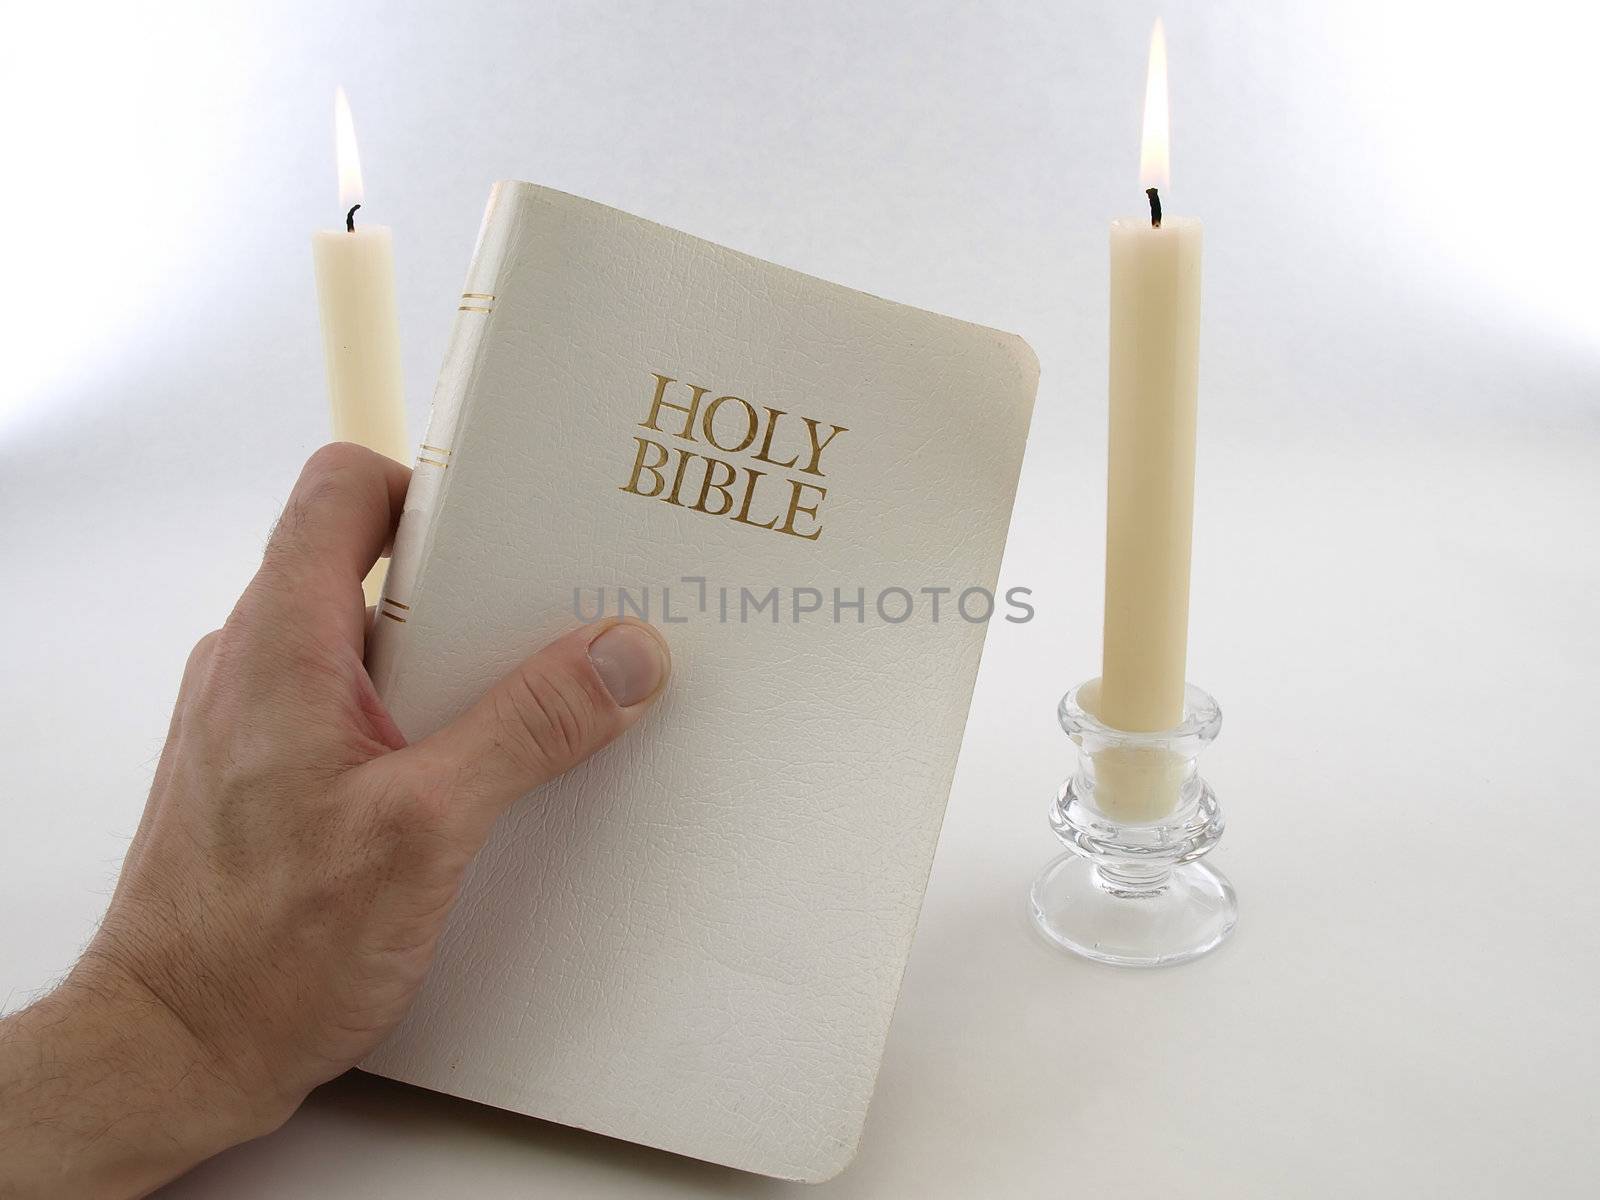 A man's hand holds up a white Holy Bible. Two taper candles burn in the background. Over a white background.